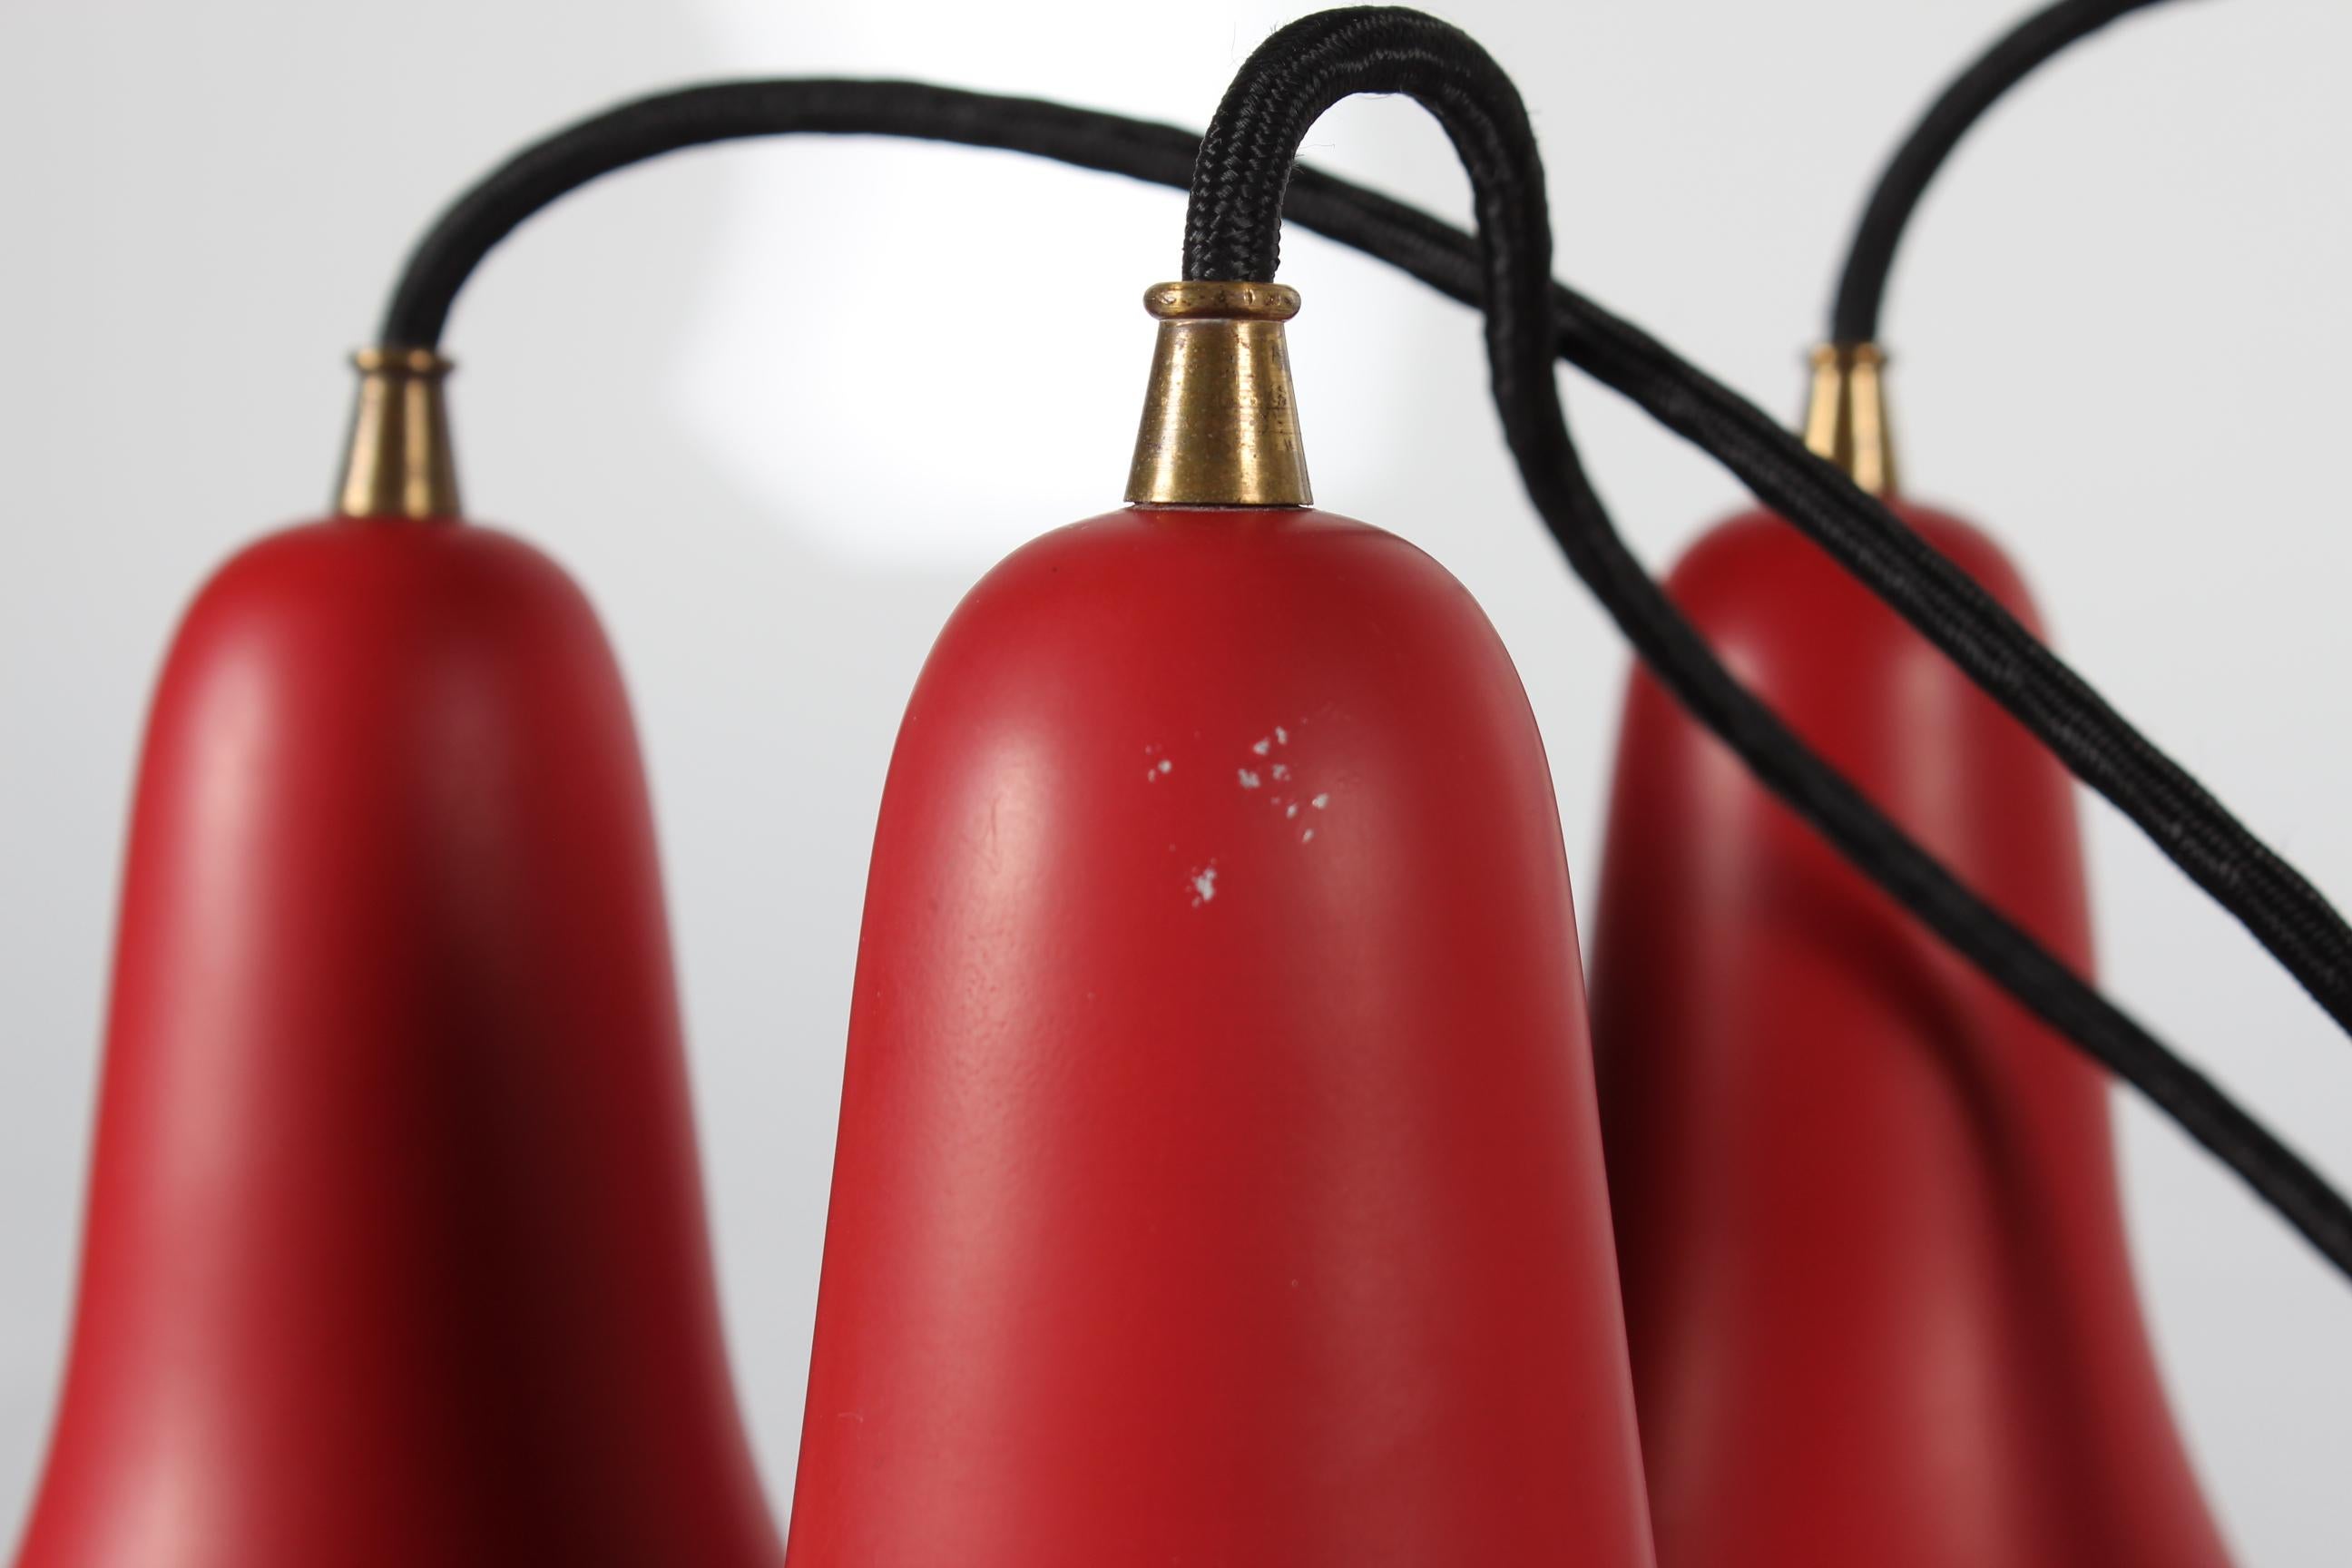 Bent Karlby 3-Cone Chandelier with Red Lacquer Made by Lyfa in Denmarkk, 1950s For Sale 3